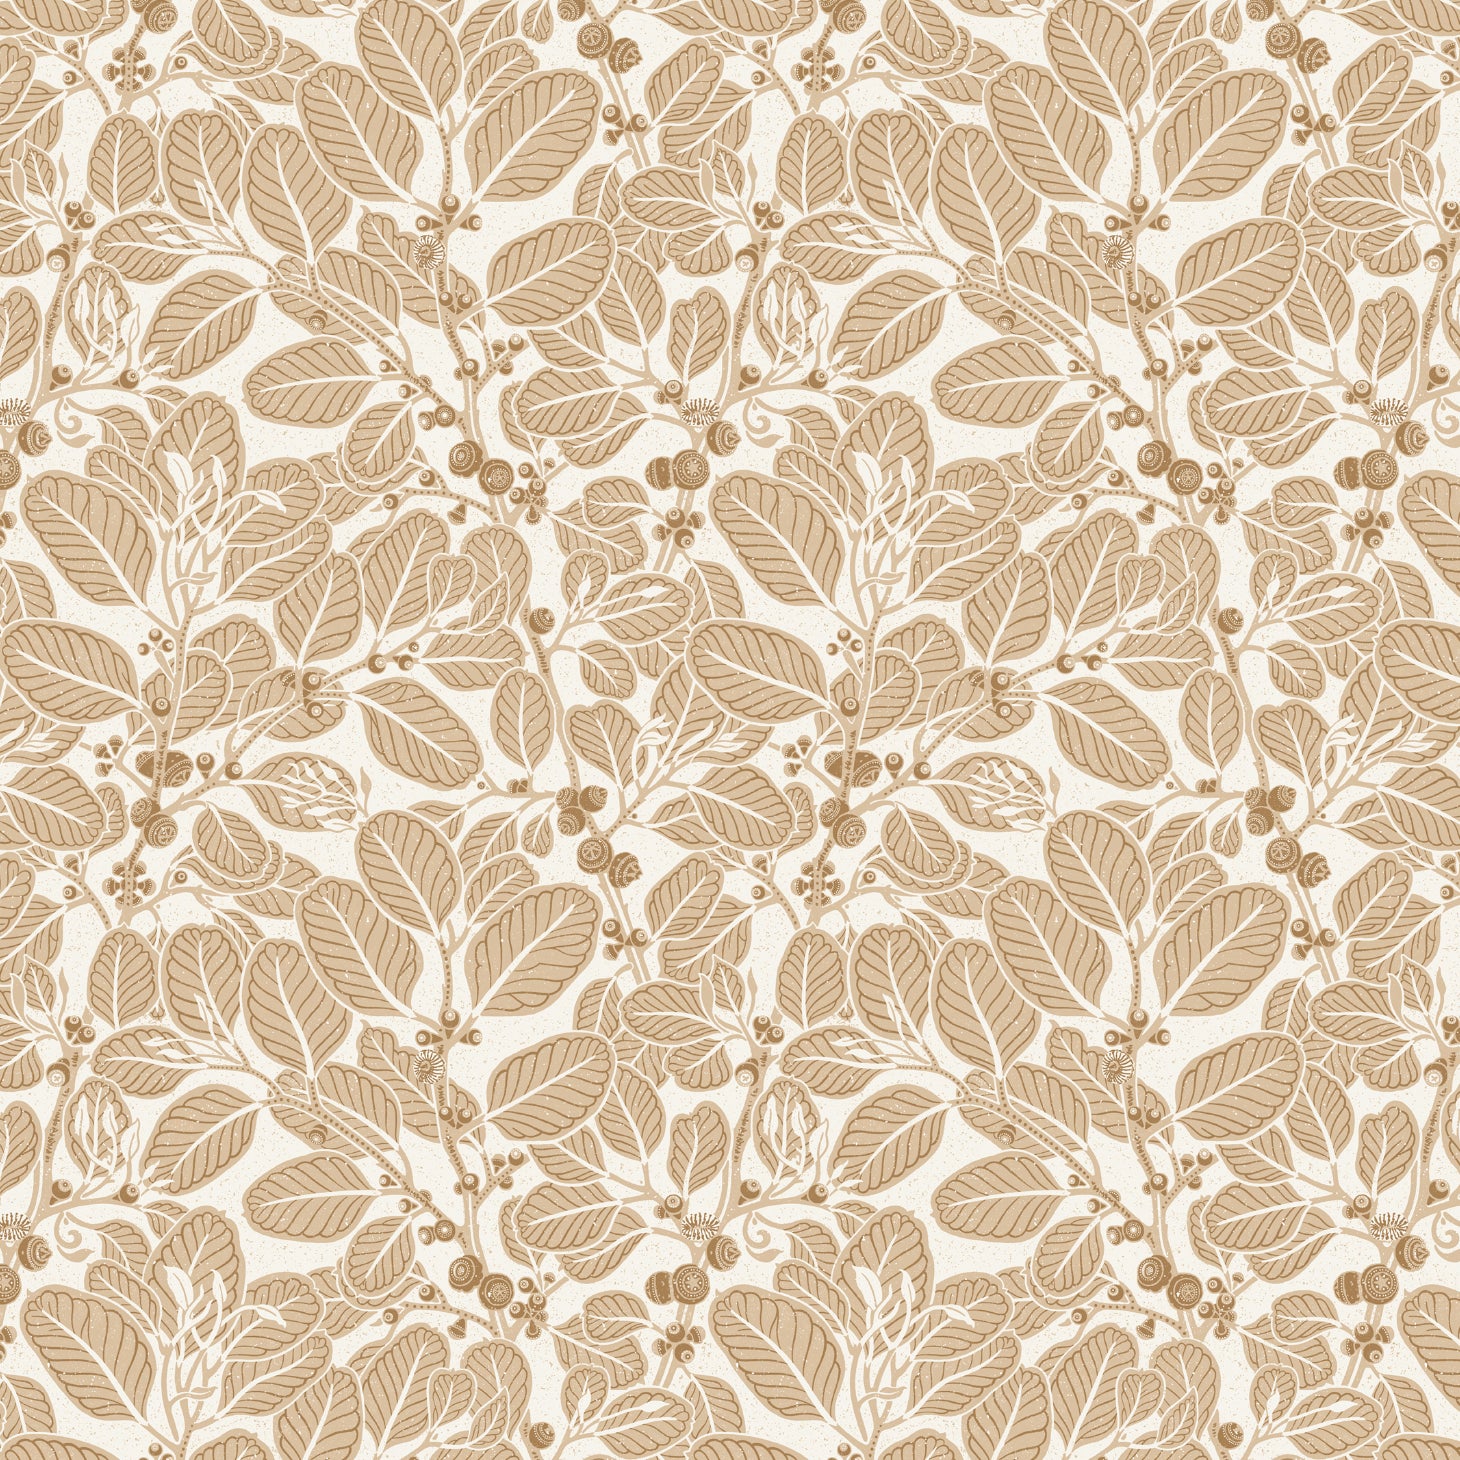 Detail of wallpaper in a dense leaf and stem print in brown on a white field.